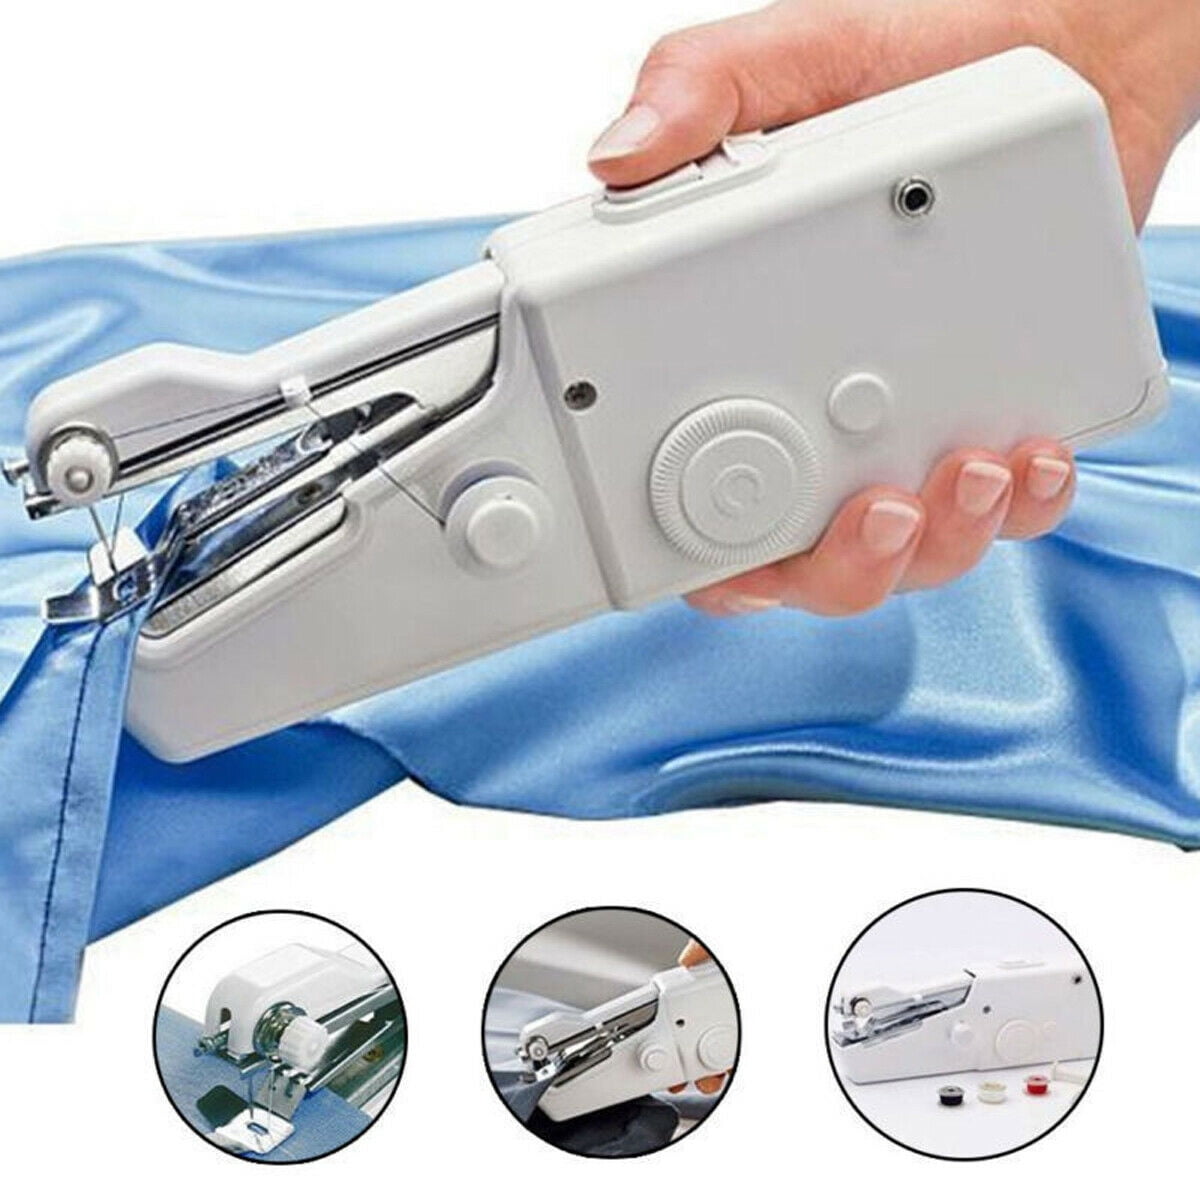 Mini Portable Smart Electric Tailor Stitch Hand-held Sewing Machine Charger Kit